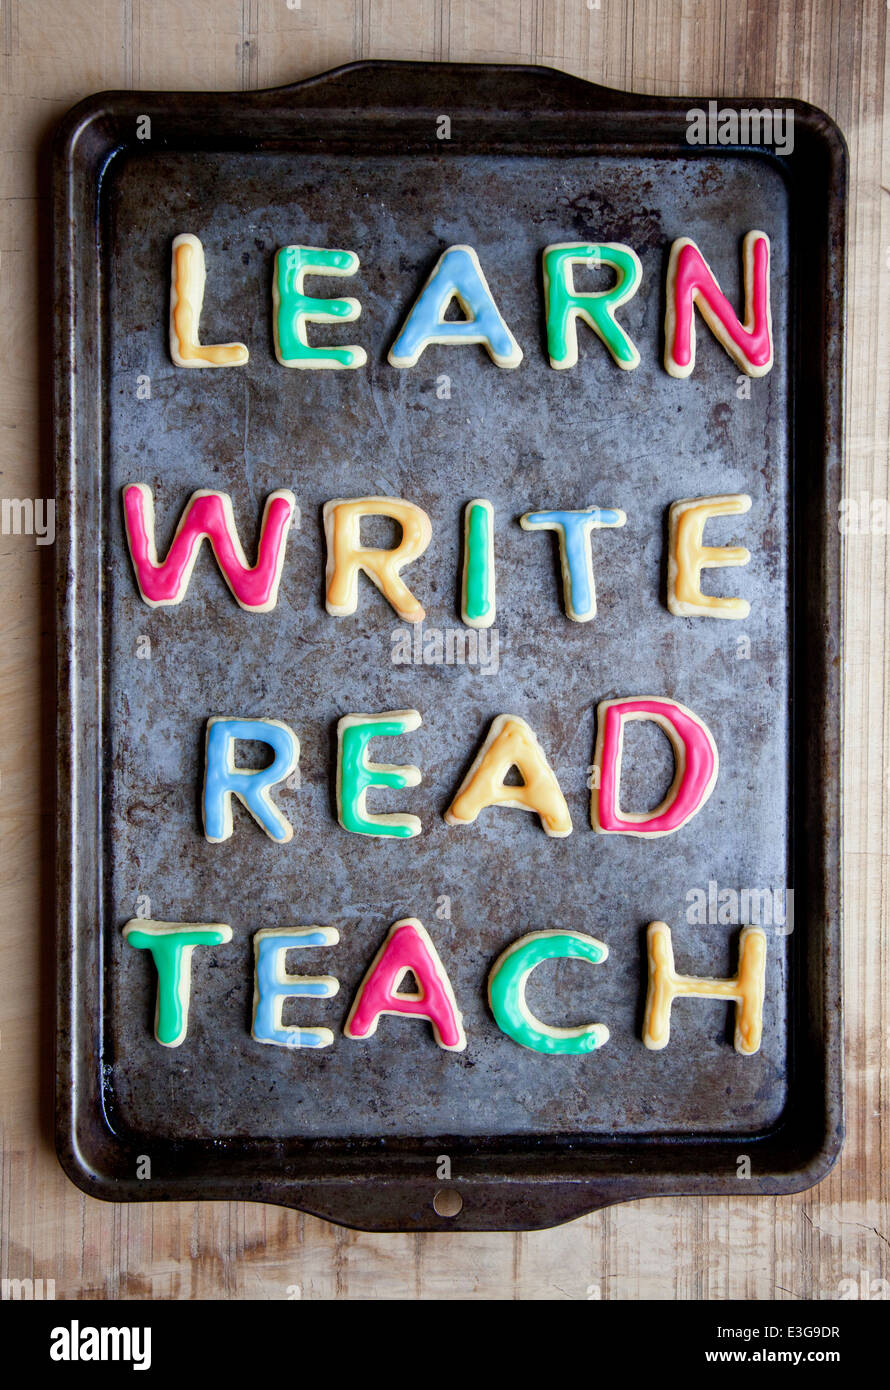 Learn Write Read and Teach cookies on baking tray Stock Photo